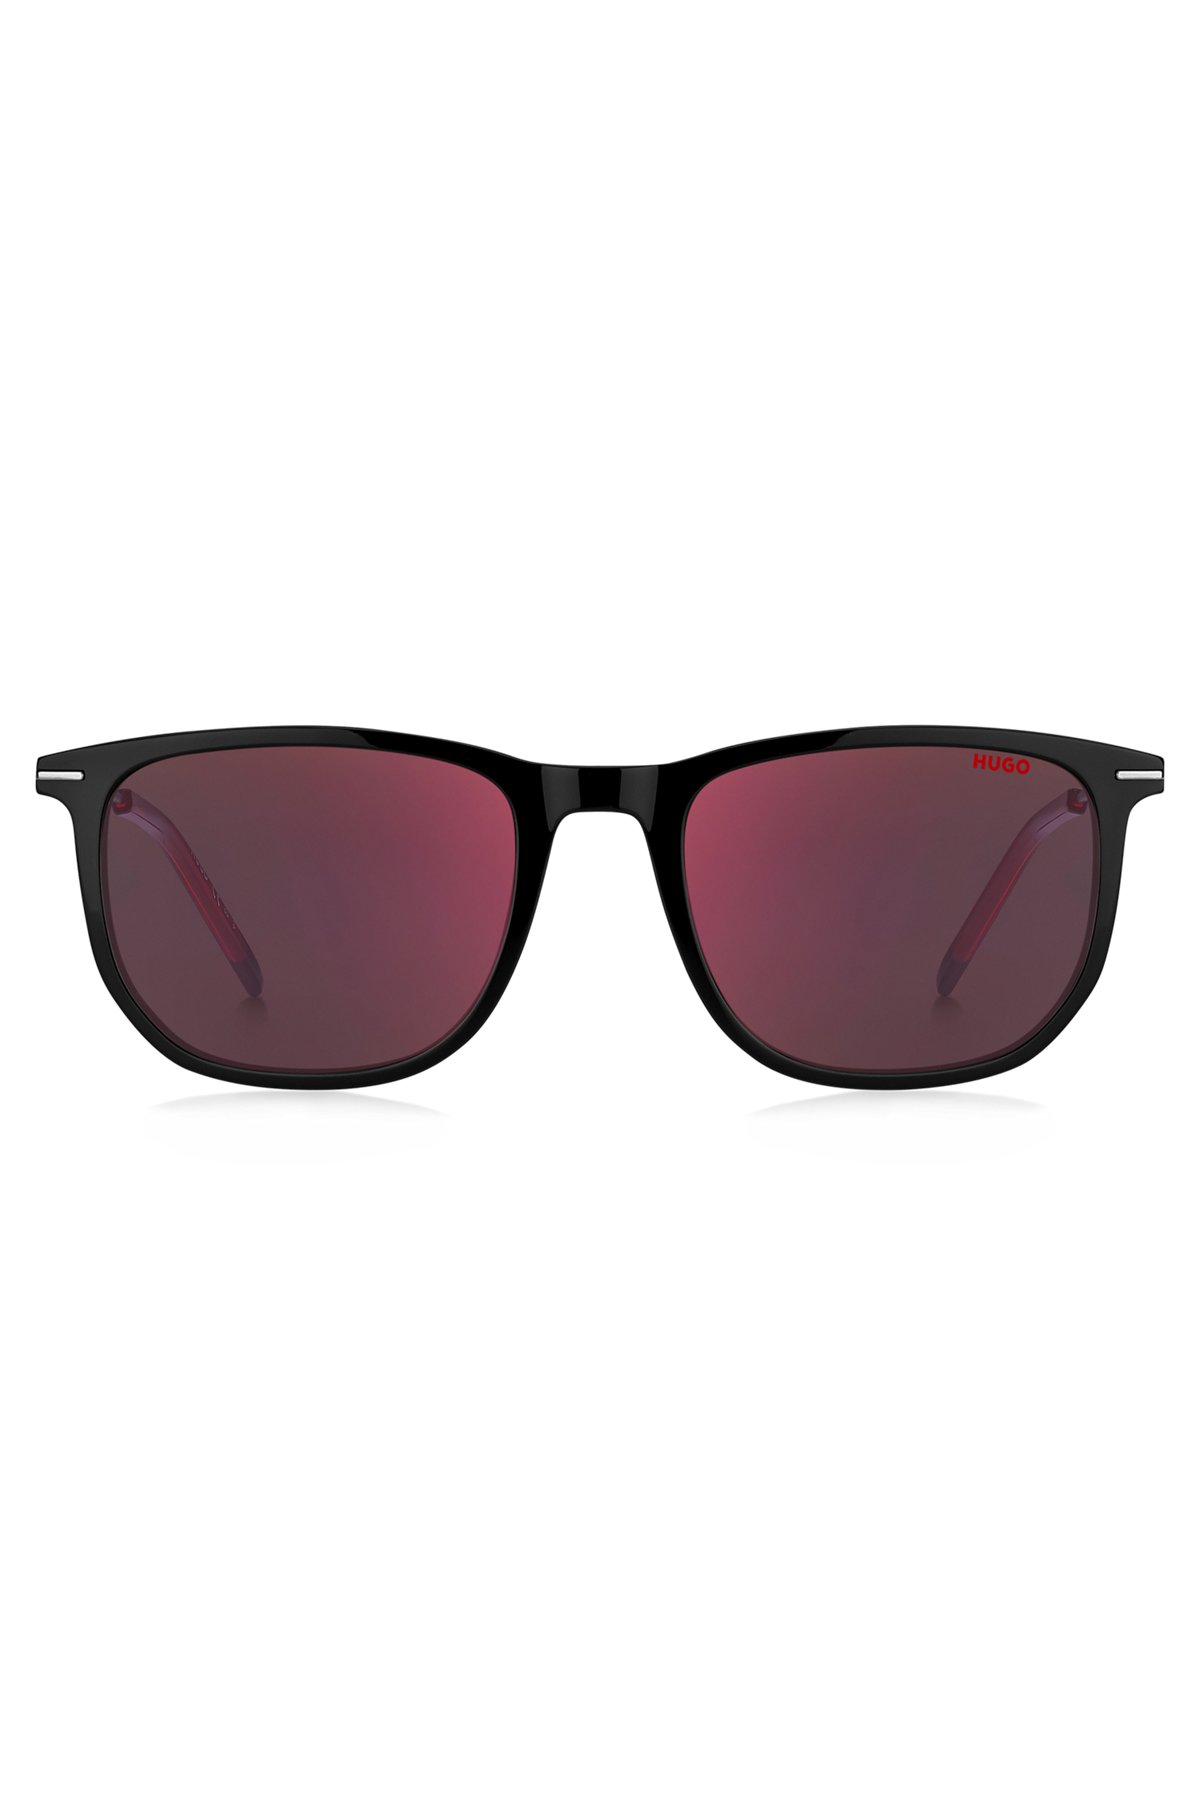 Black-acetate sunglasses with red details, Black Patterned